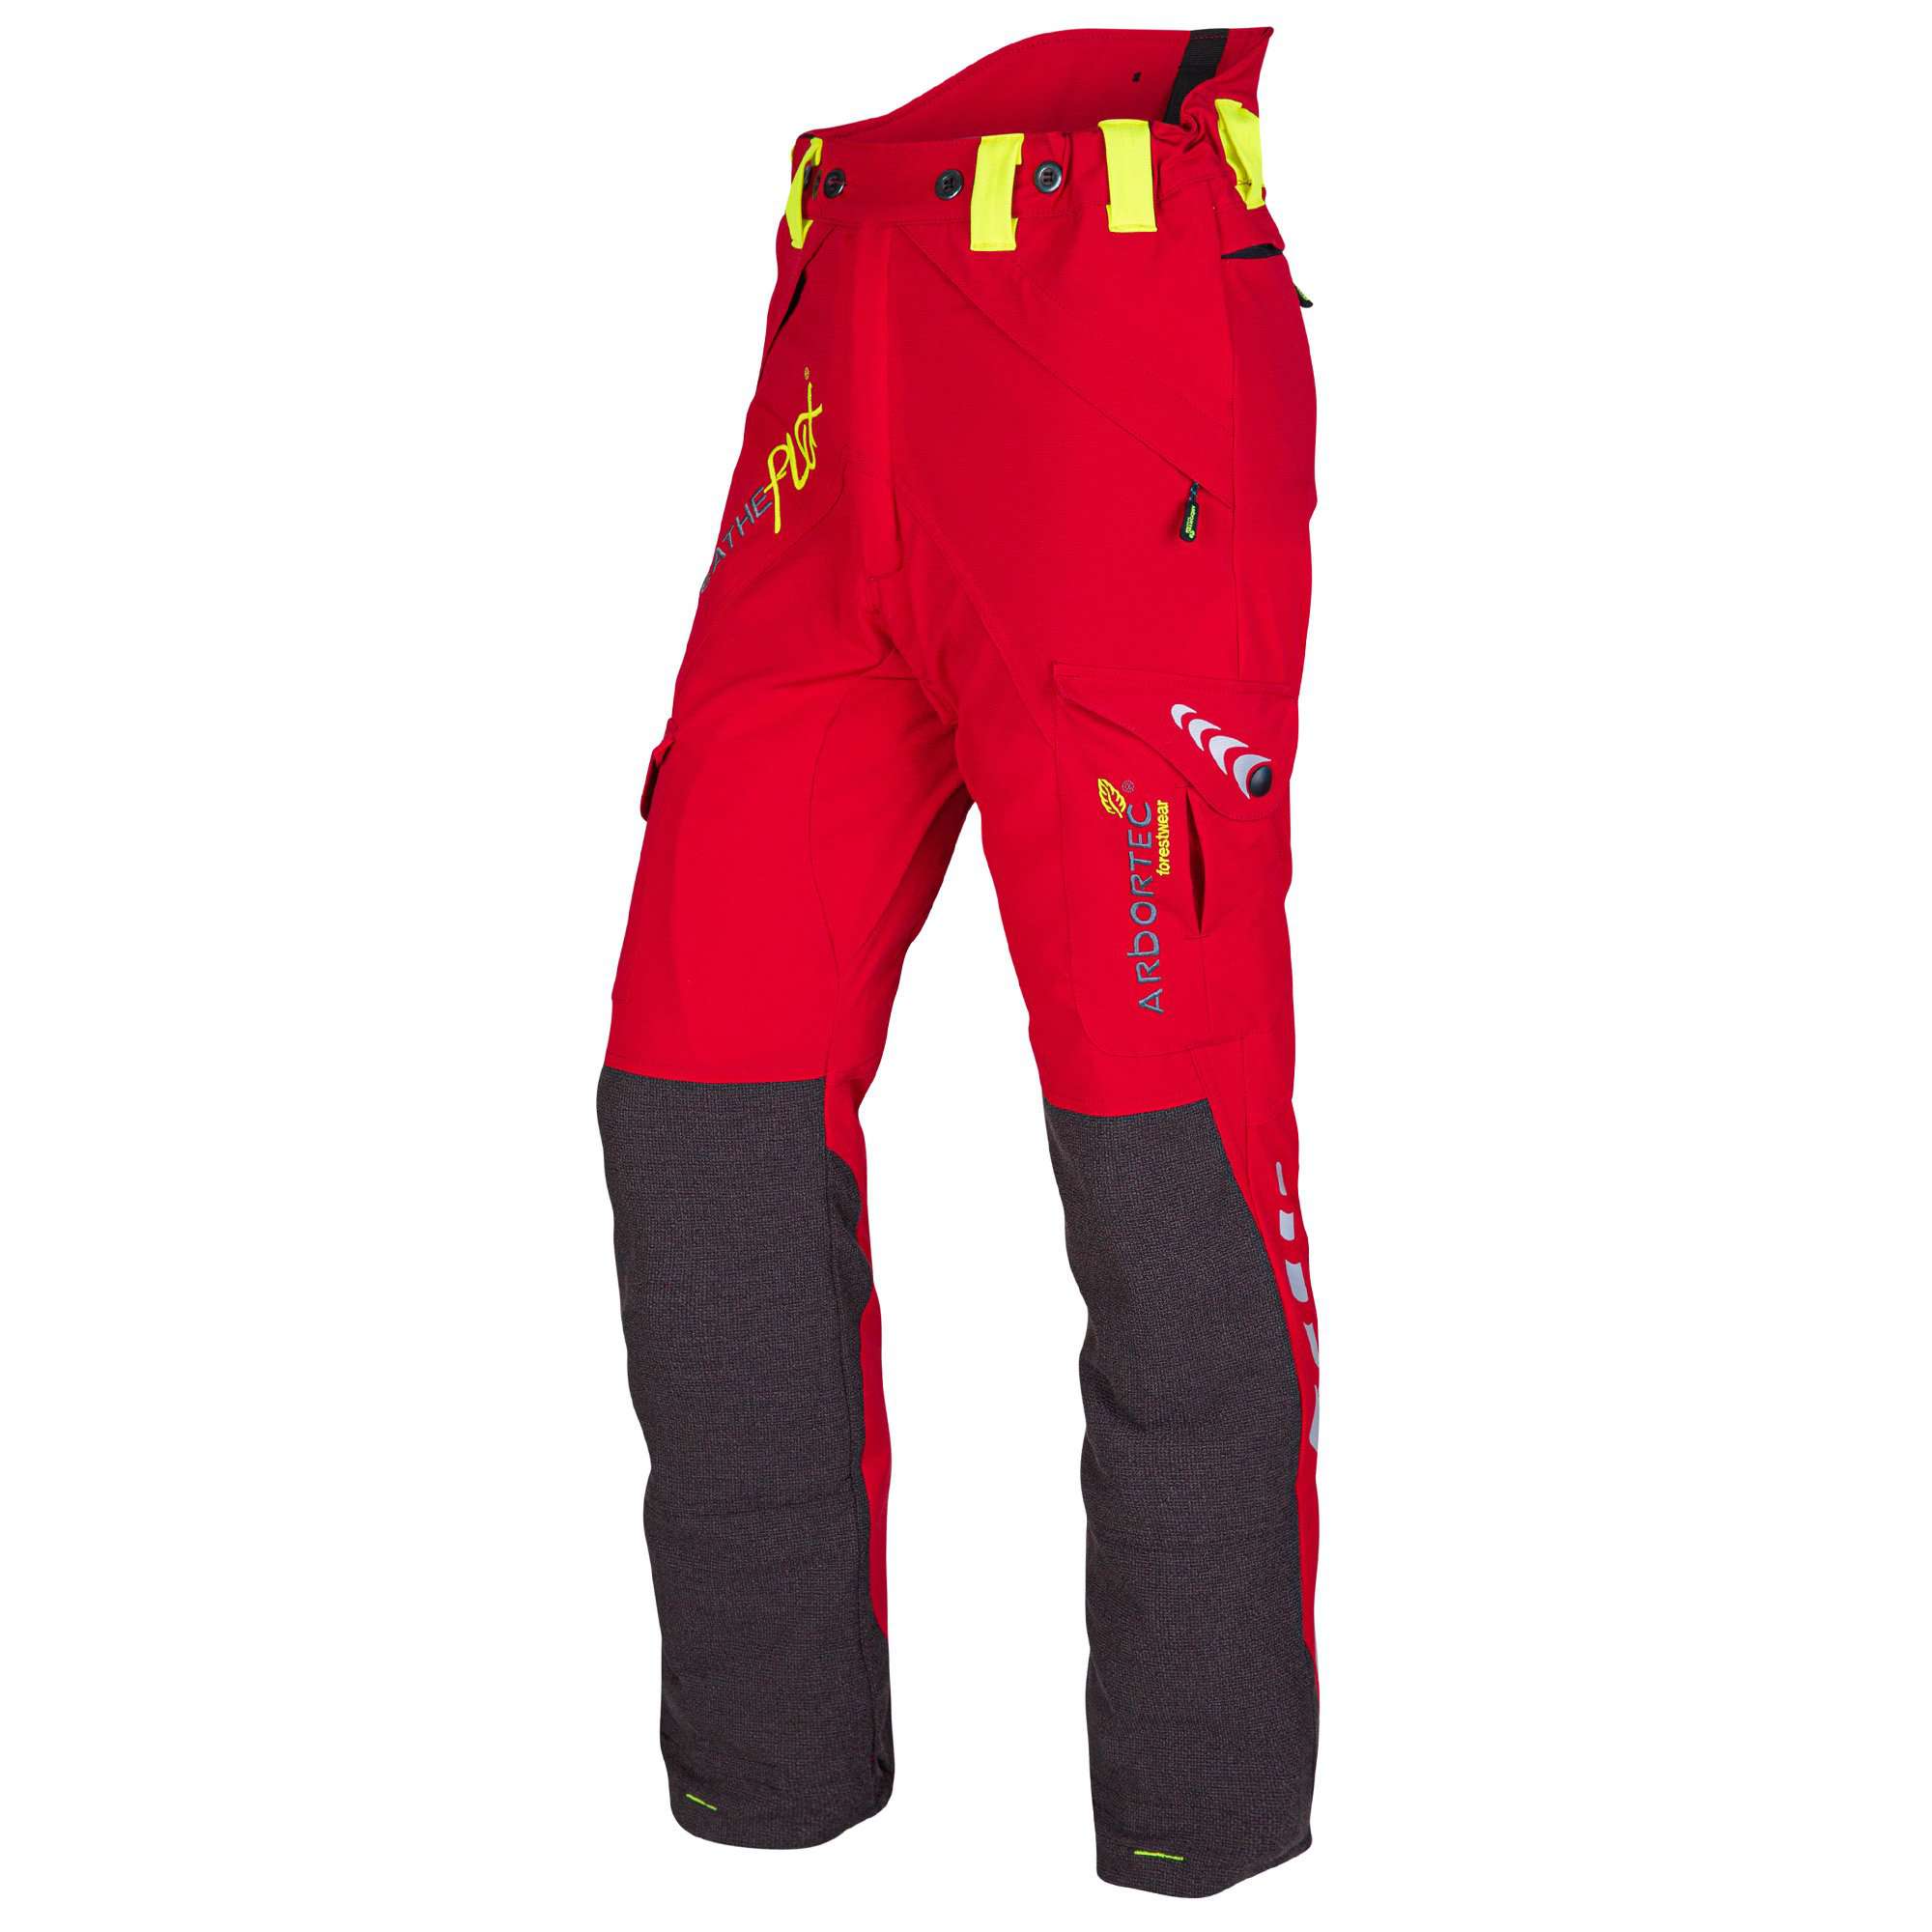 AT4010 Breatheflex Type A Class 1 Chainsaw Trousers - Red - Arbortec Forestwear